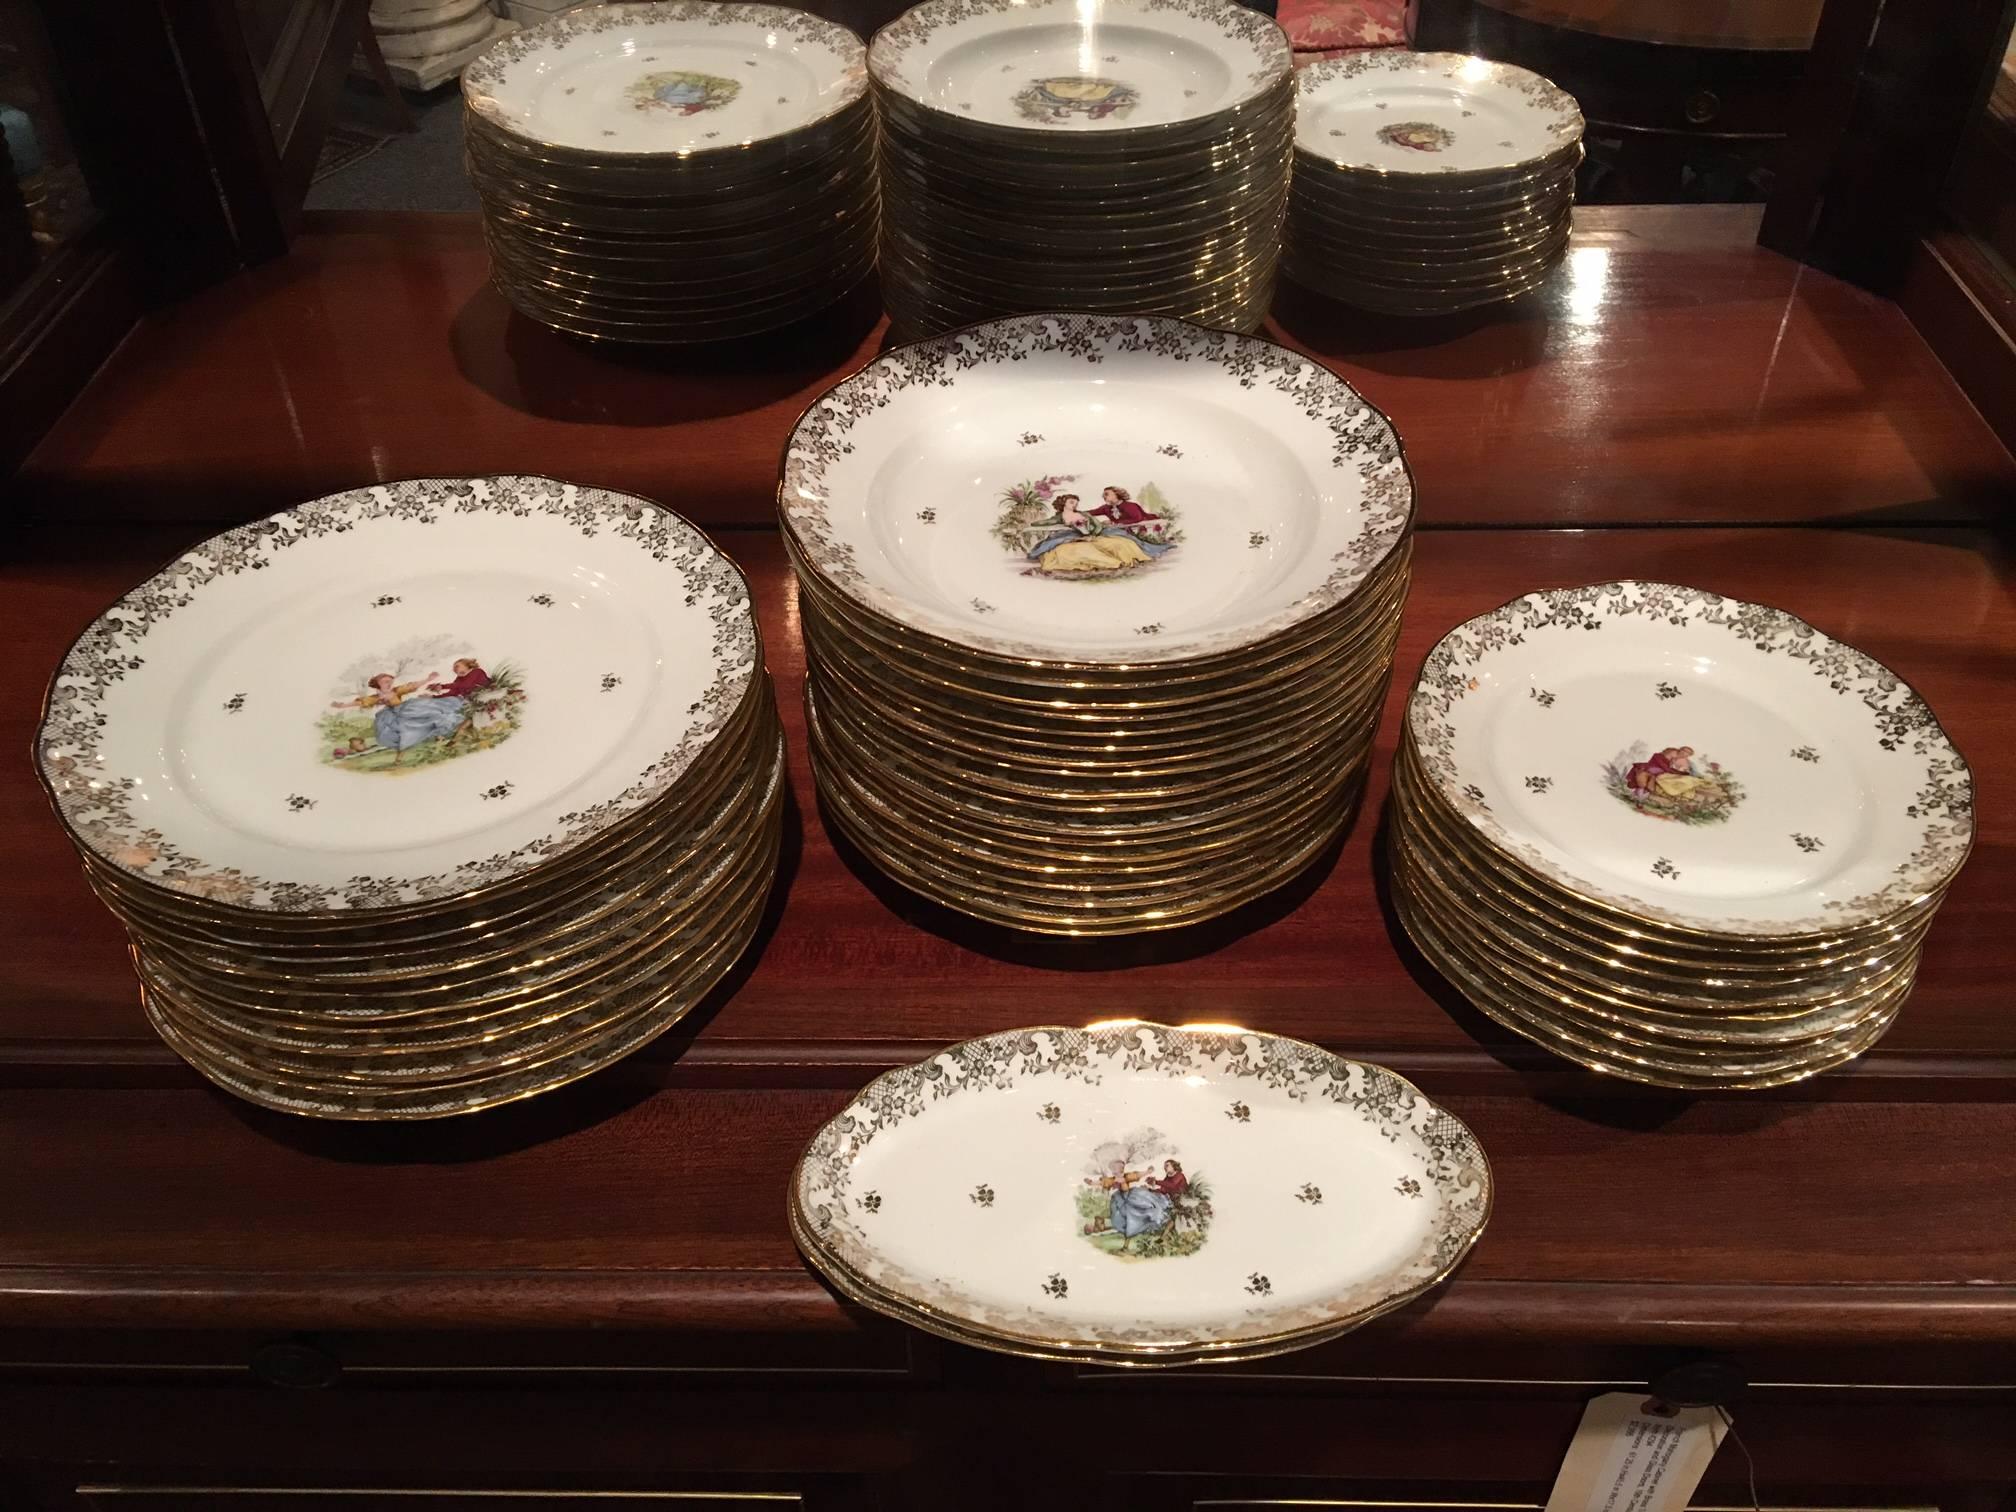 French Veritable Porcelain Dinnerware with Gold Scrolls, Landscape and People 1